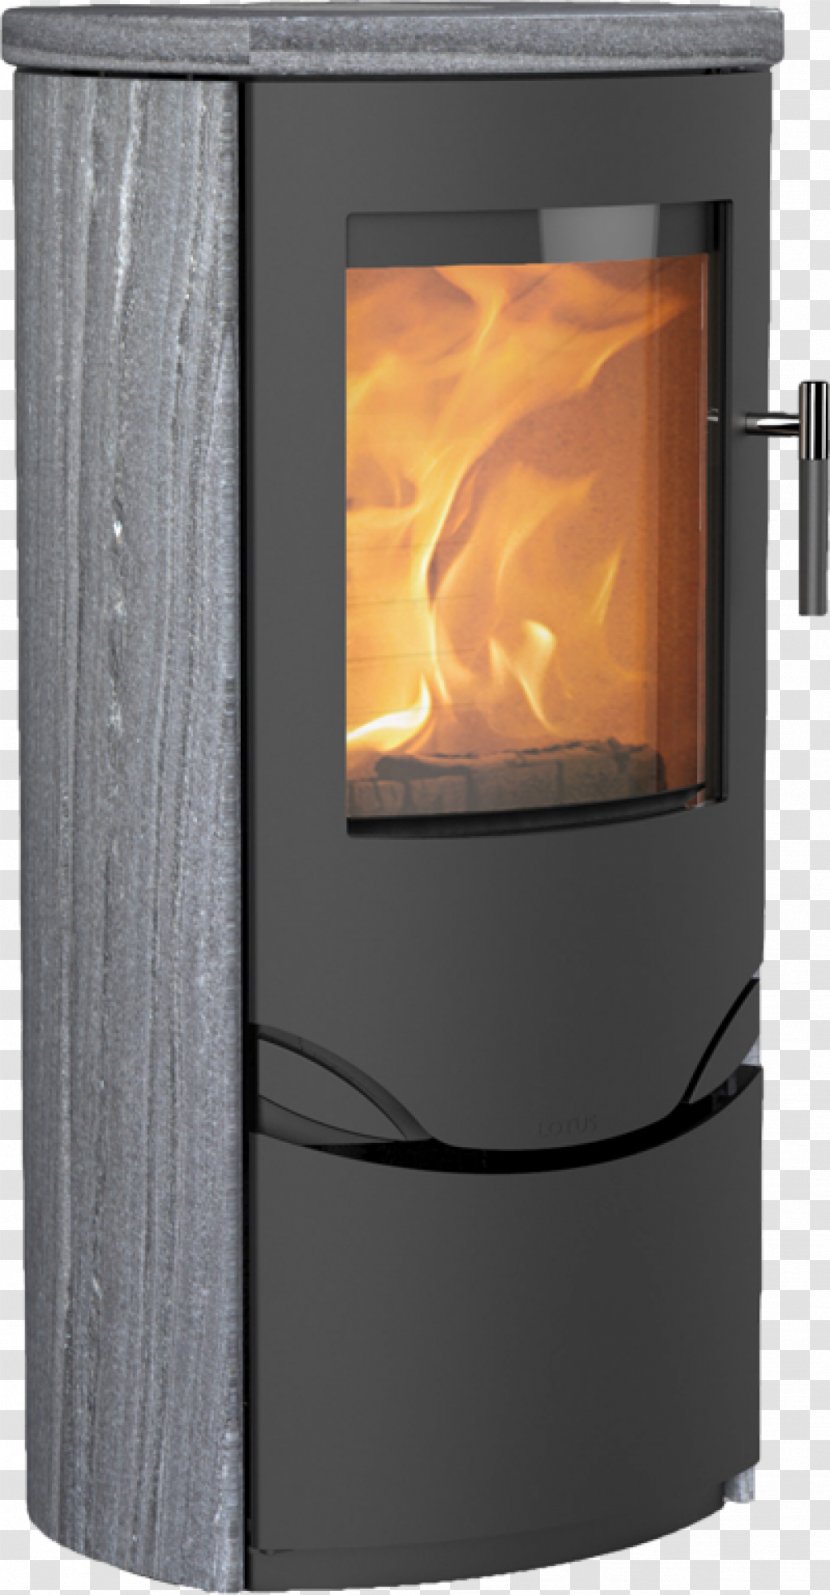 Wood Stoves Kaminofen Heat Fireplace - Hearth - Stove Transparent PNG